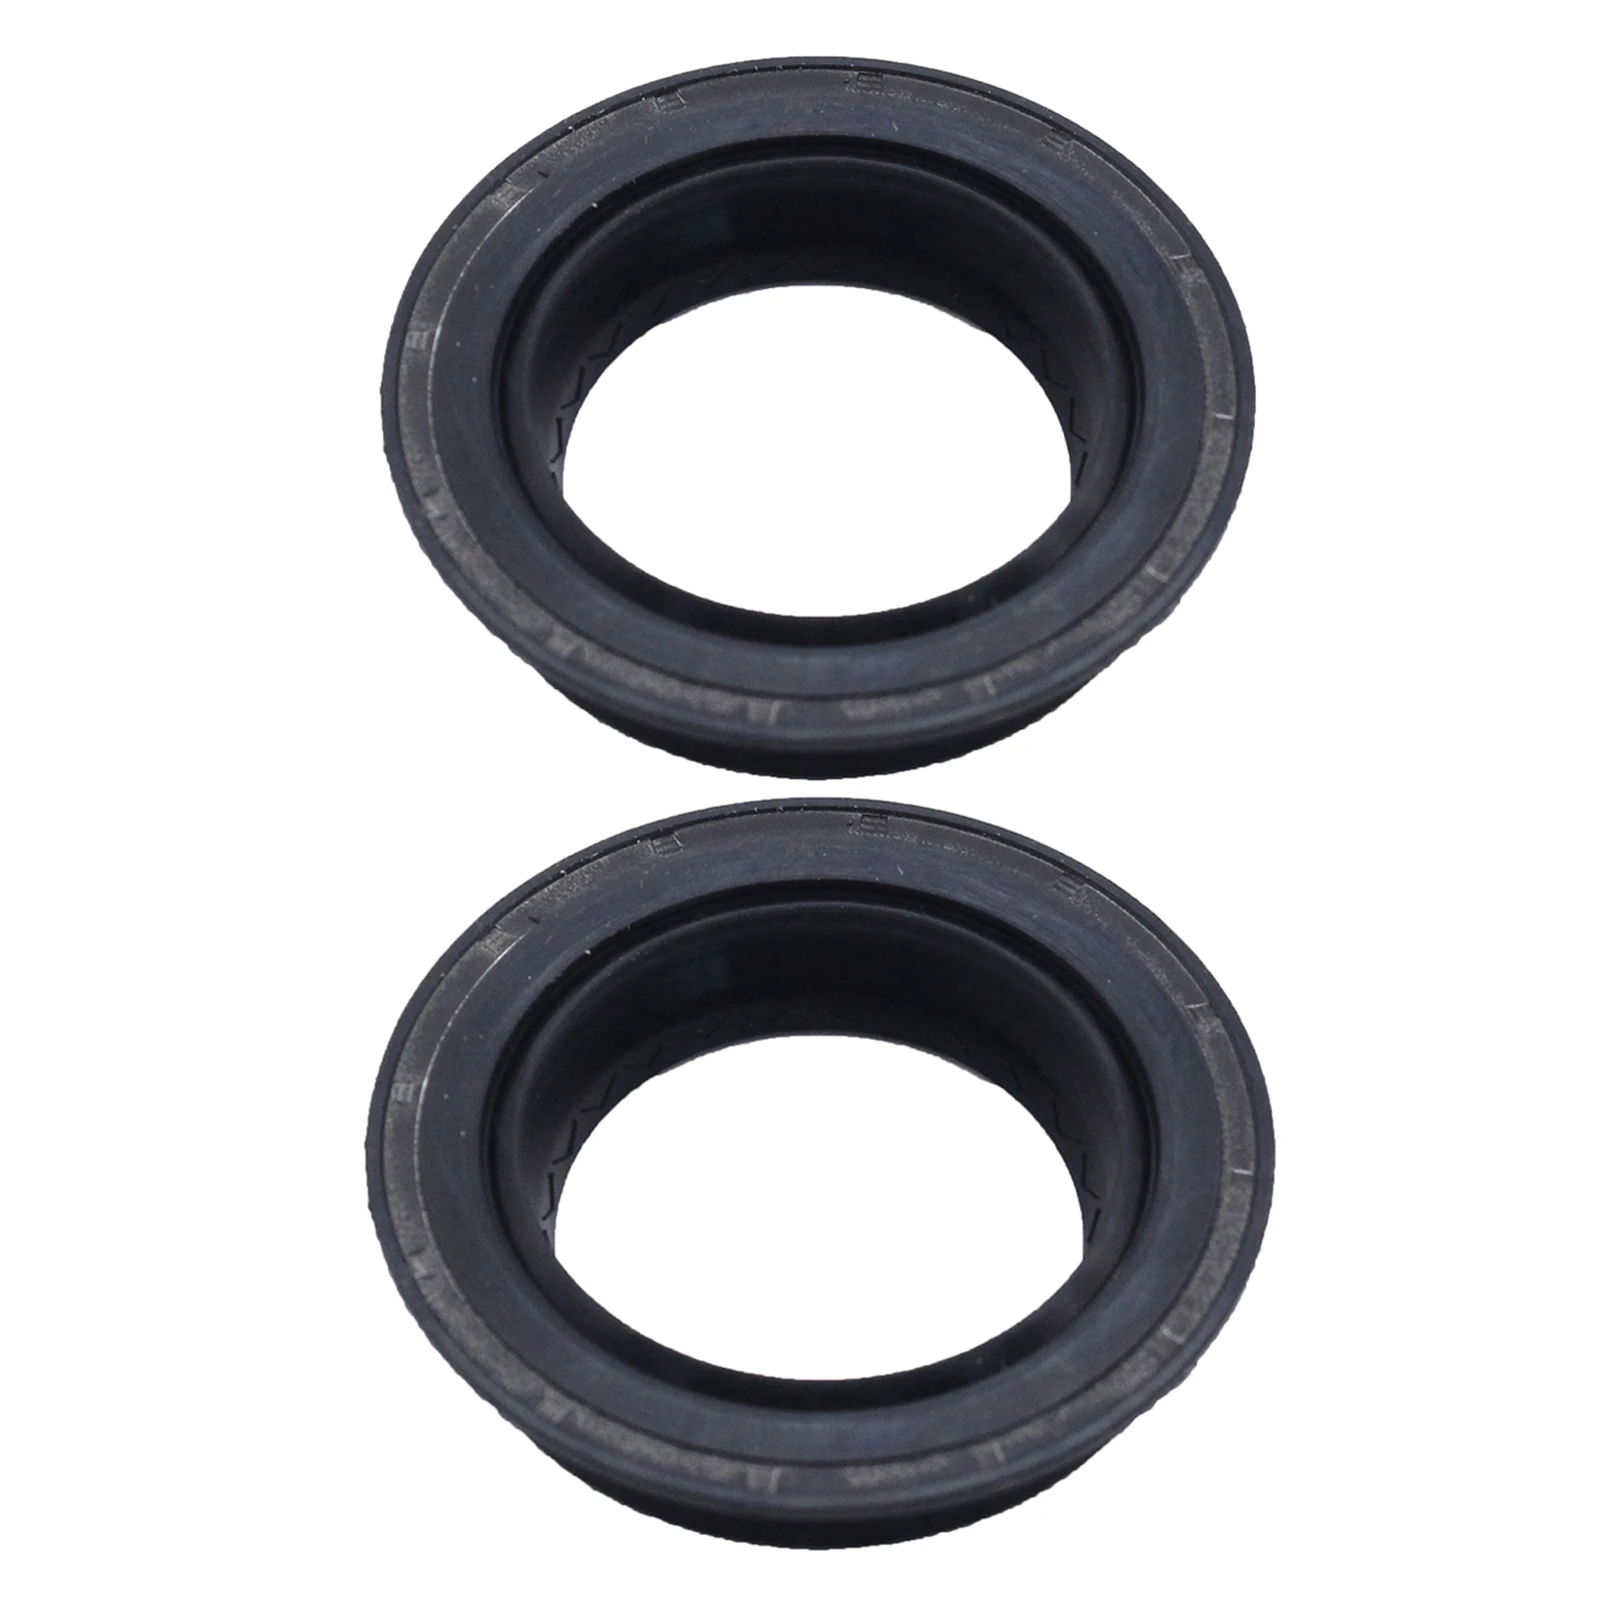 2 Packs 303752-KIT 40533-01J00 Trail Safe Front Axle Seal Oil Seal Kit Mount Kit Accessories Parts Fit for Patrol Y60 Y61